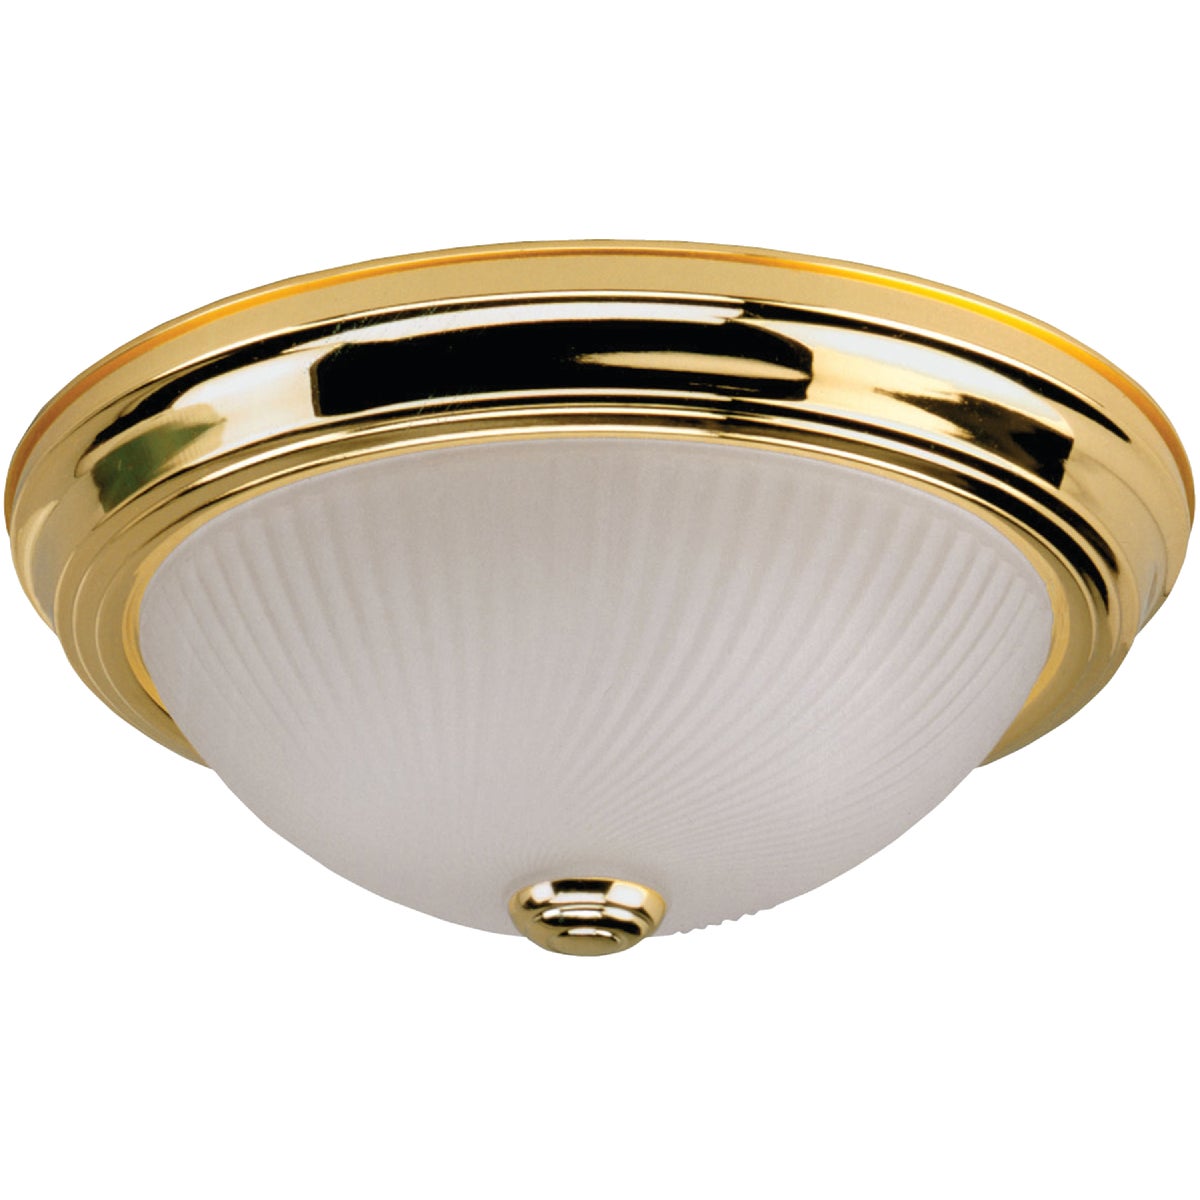 Home Impressions IFM211PB Home Impressions 11 In. Polished Brass Incandescent Flush Mount Ceiling Light Fixture IFM211PB